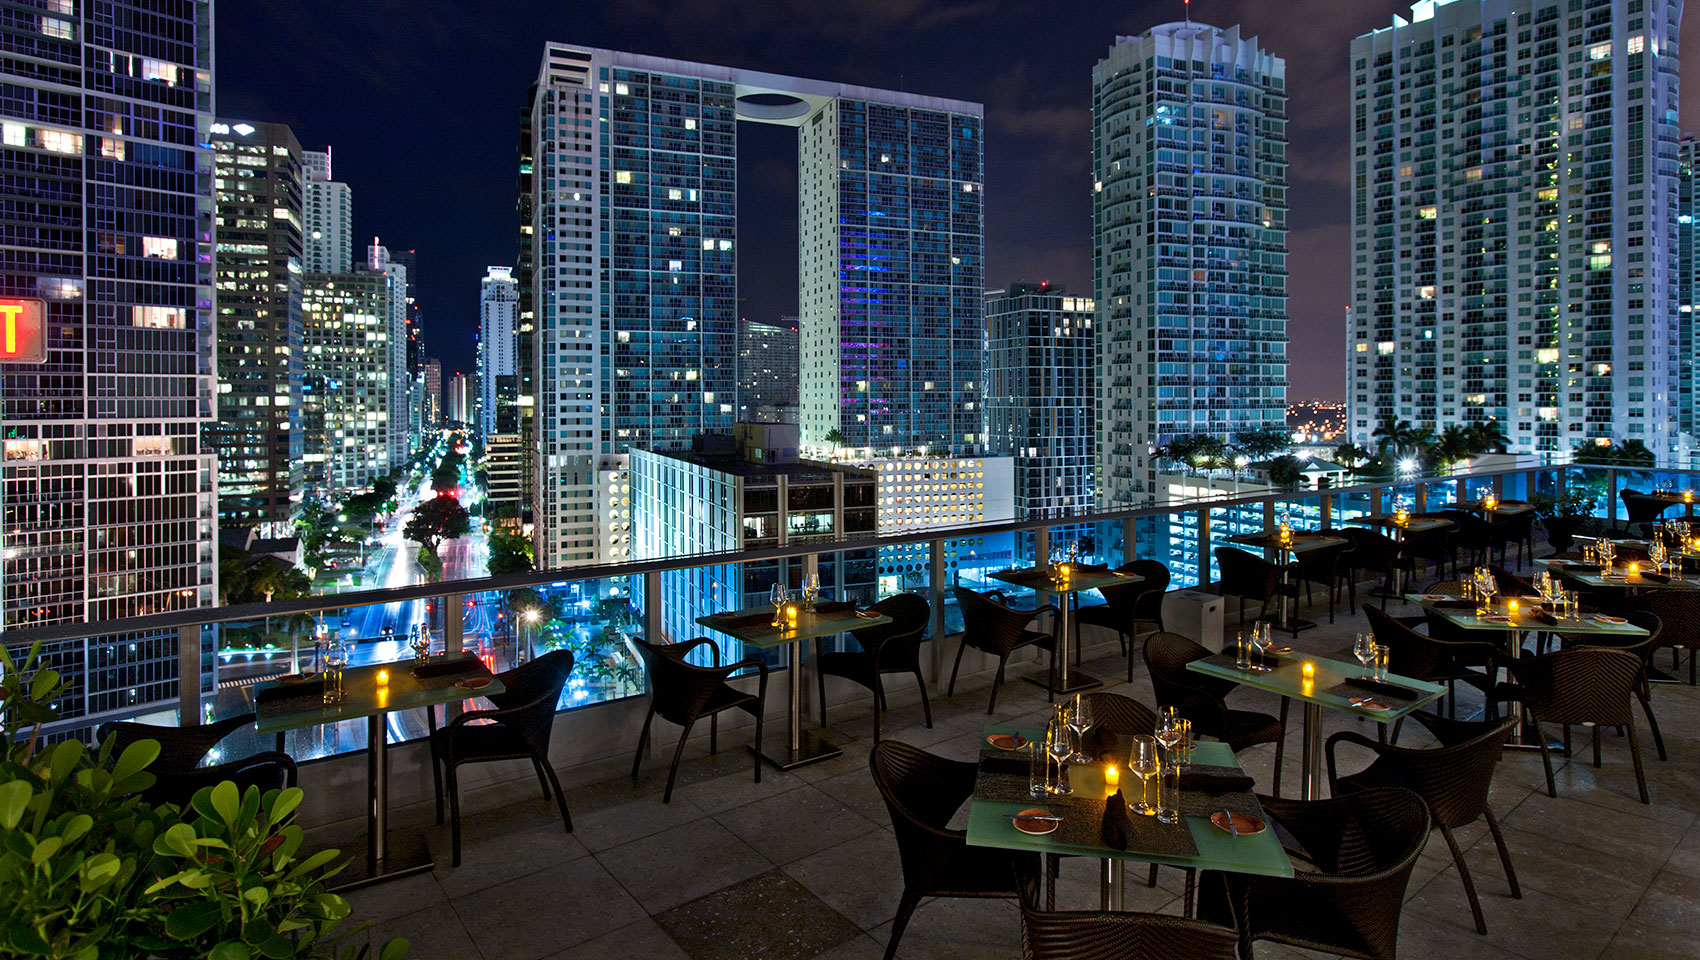 Fernanda Z’s 5 Most Amazing Rooftops Experiences: Reach New Heights in Miami